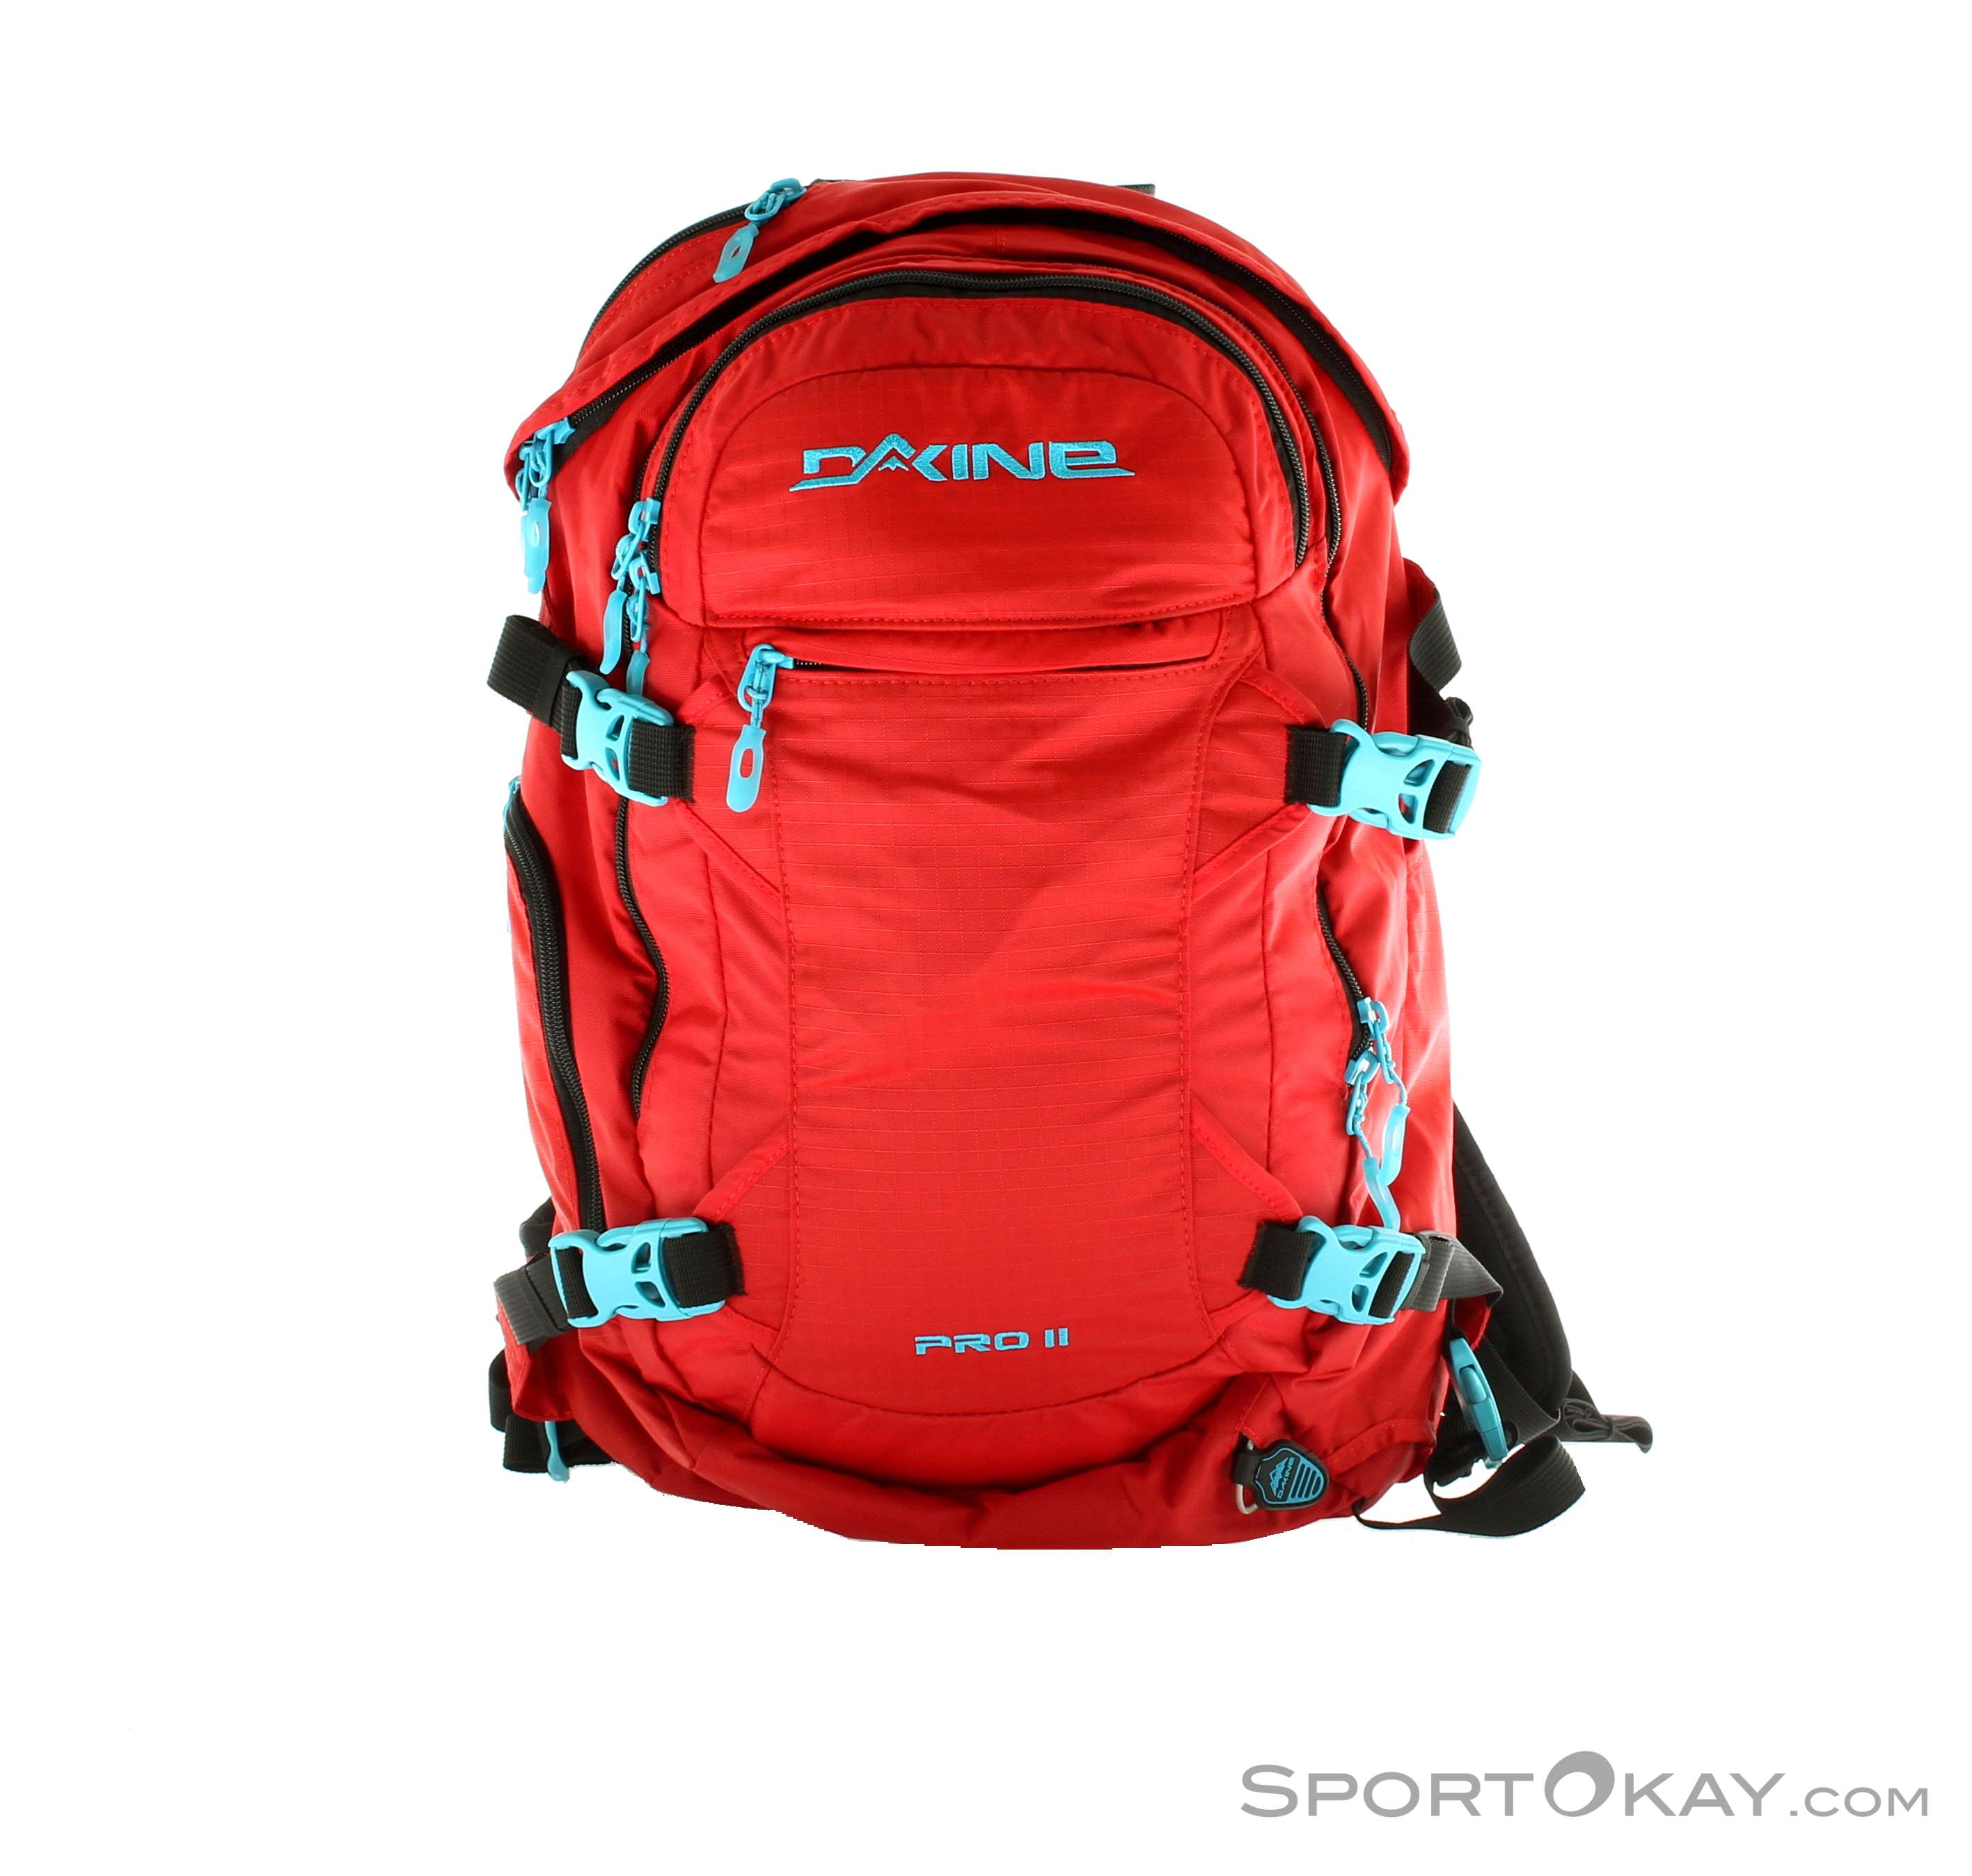 Contract les woede Dakine Pro 2 26l Backpack - Backpacks - Backpacks & Headlamps - Outdoor -  All